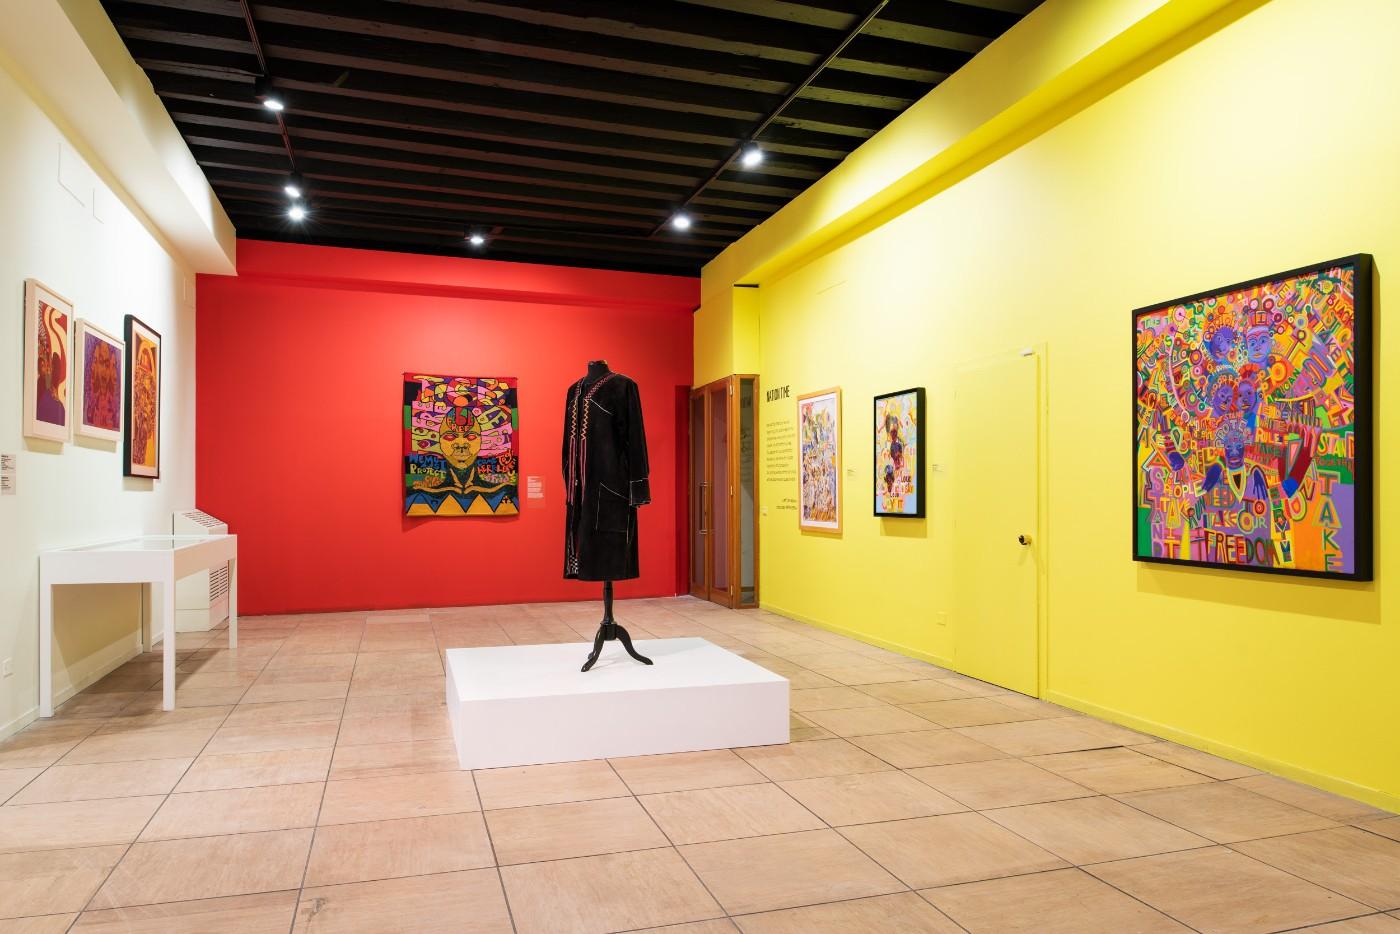 AFRICOBRA: Nation Time (installation view), 2019, Venice Biennale, Venice, Italy